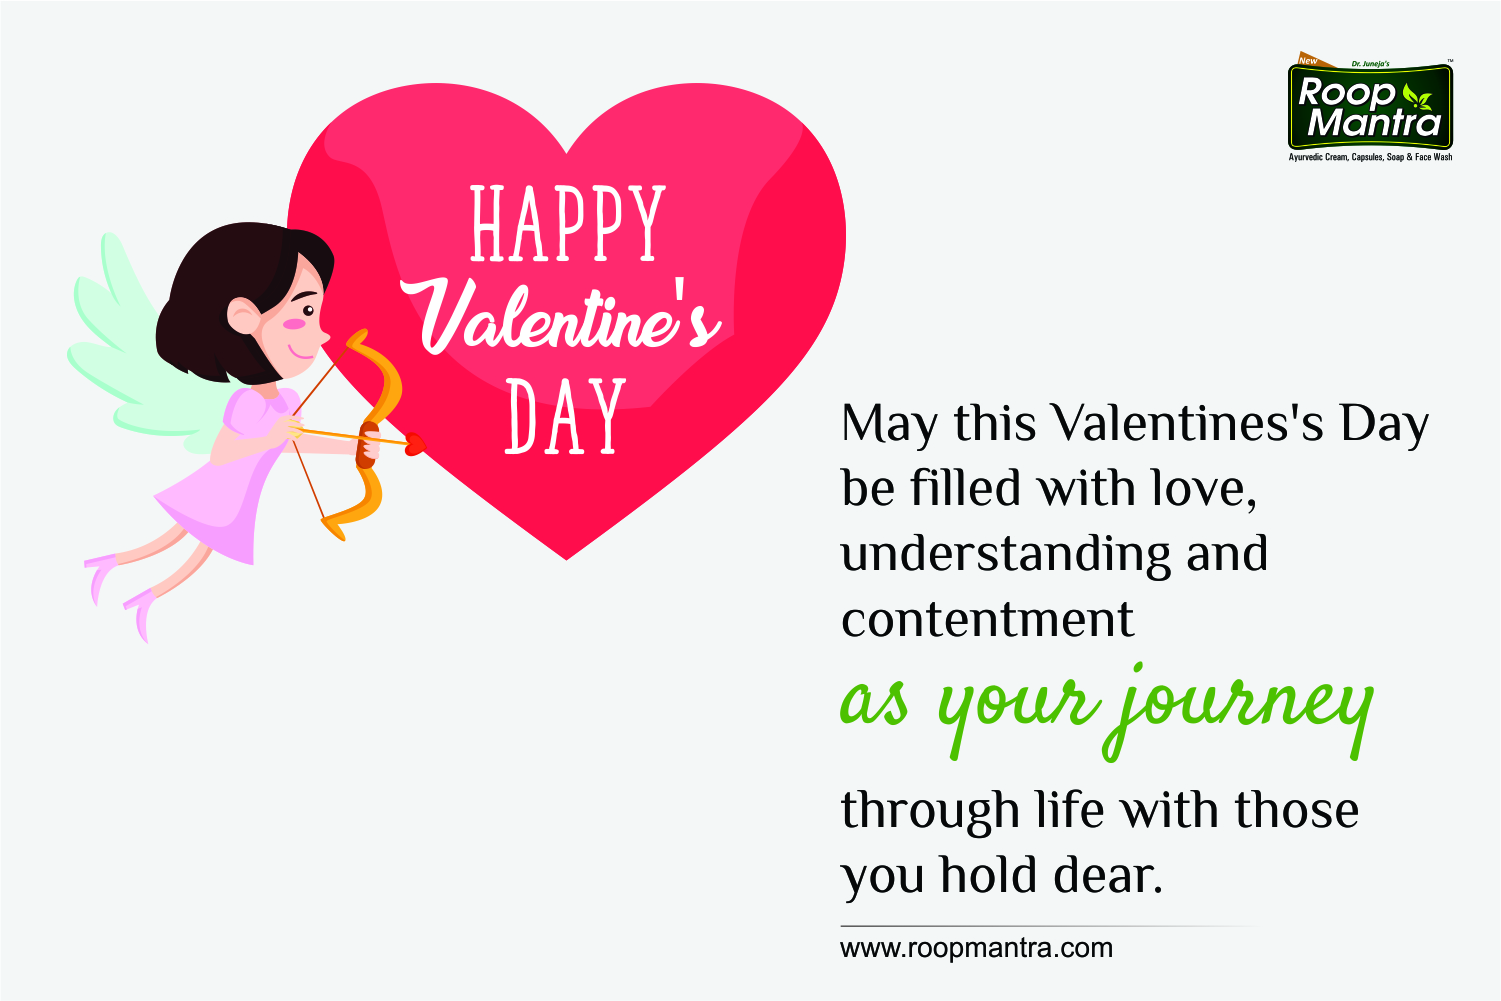 Valentine Day, February Special, Special Dates Of Feb, Loving Days, Rememberable February, Whats Special In February 2018, Best Of February 2018, Special Quotes, Status, Feb 2018 Special, Roop Mantra